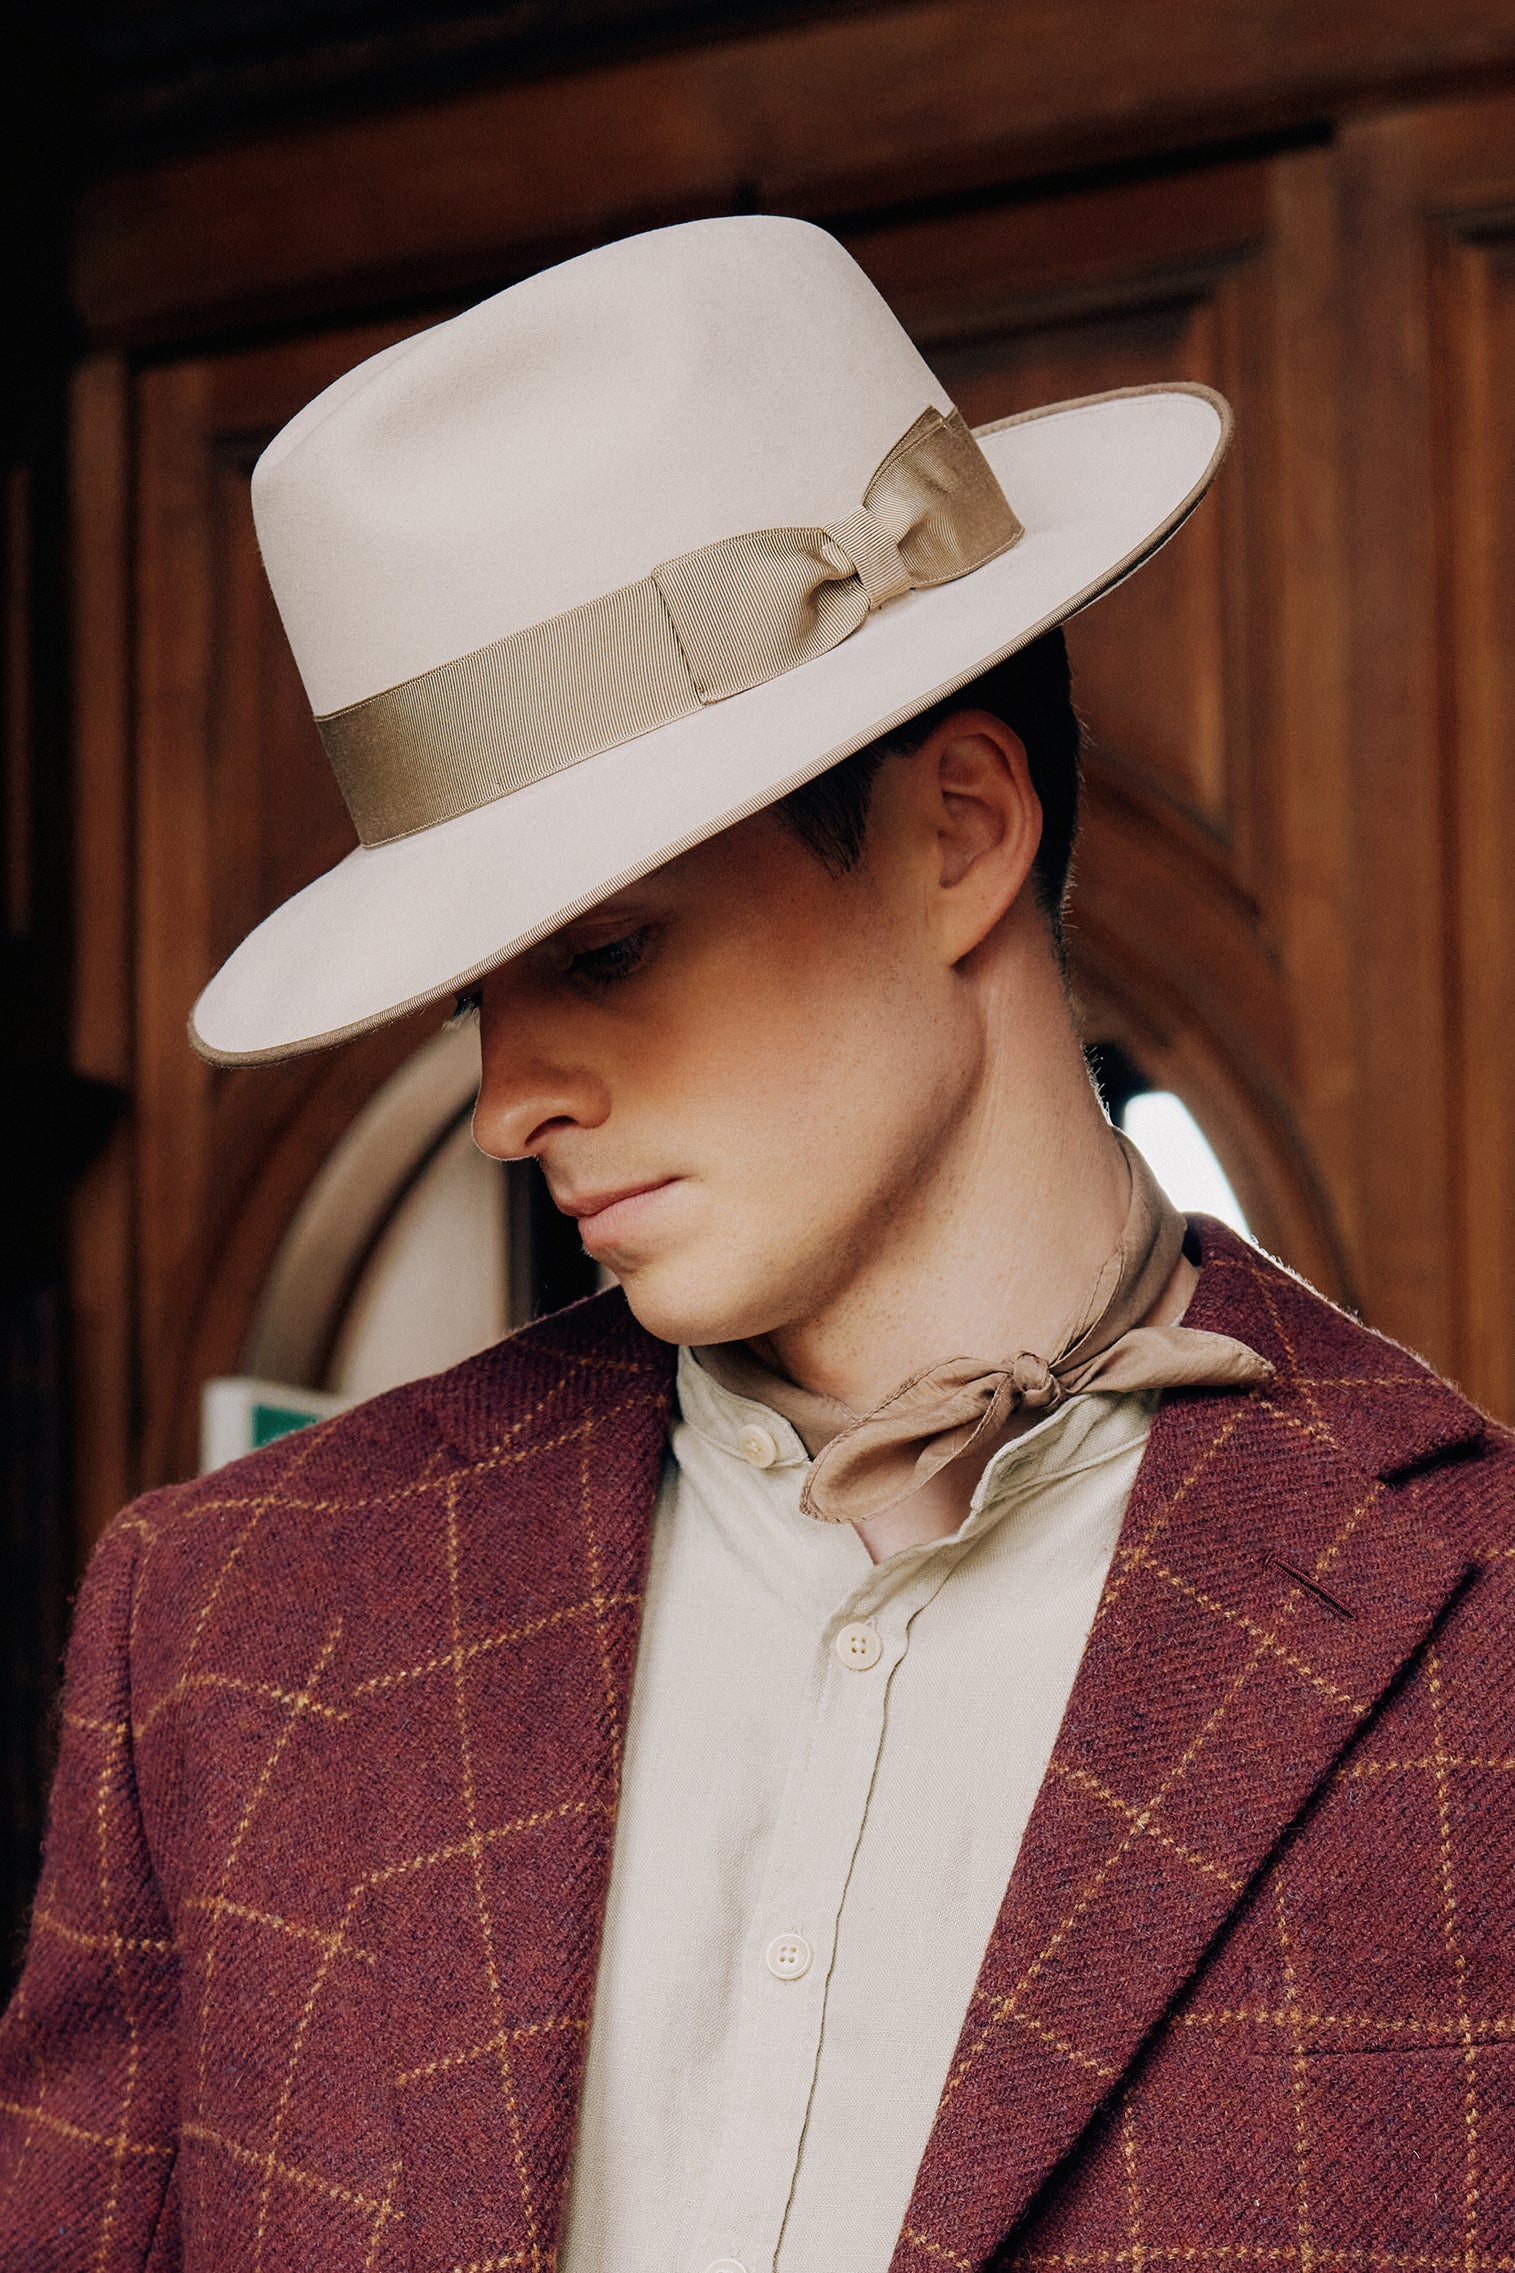 St James's Beige Fedora - Hats for Tall People - Lock & Co. Hatters London UK